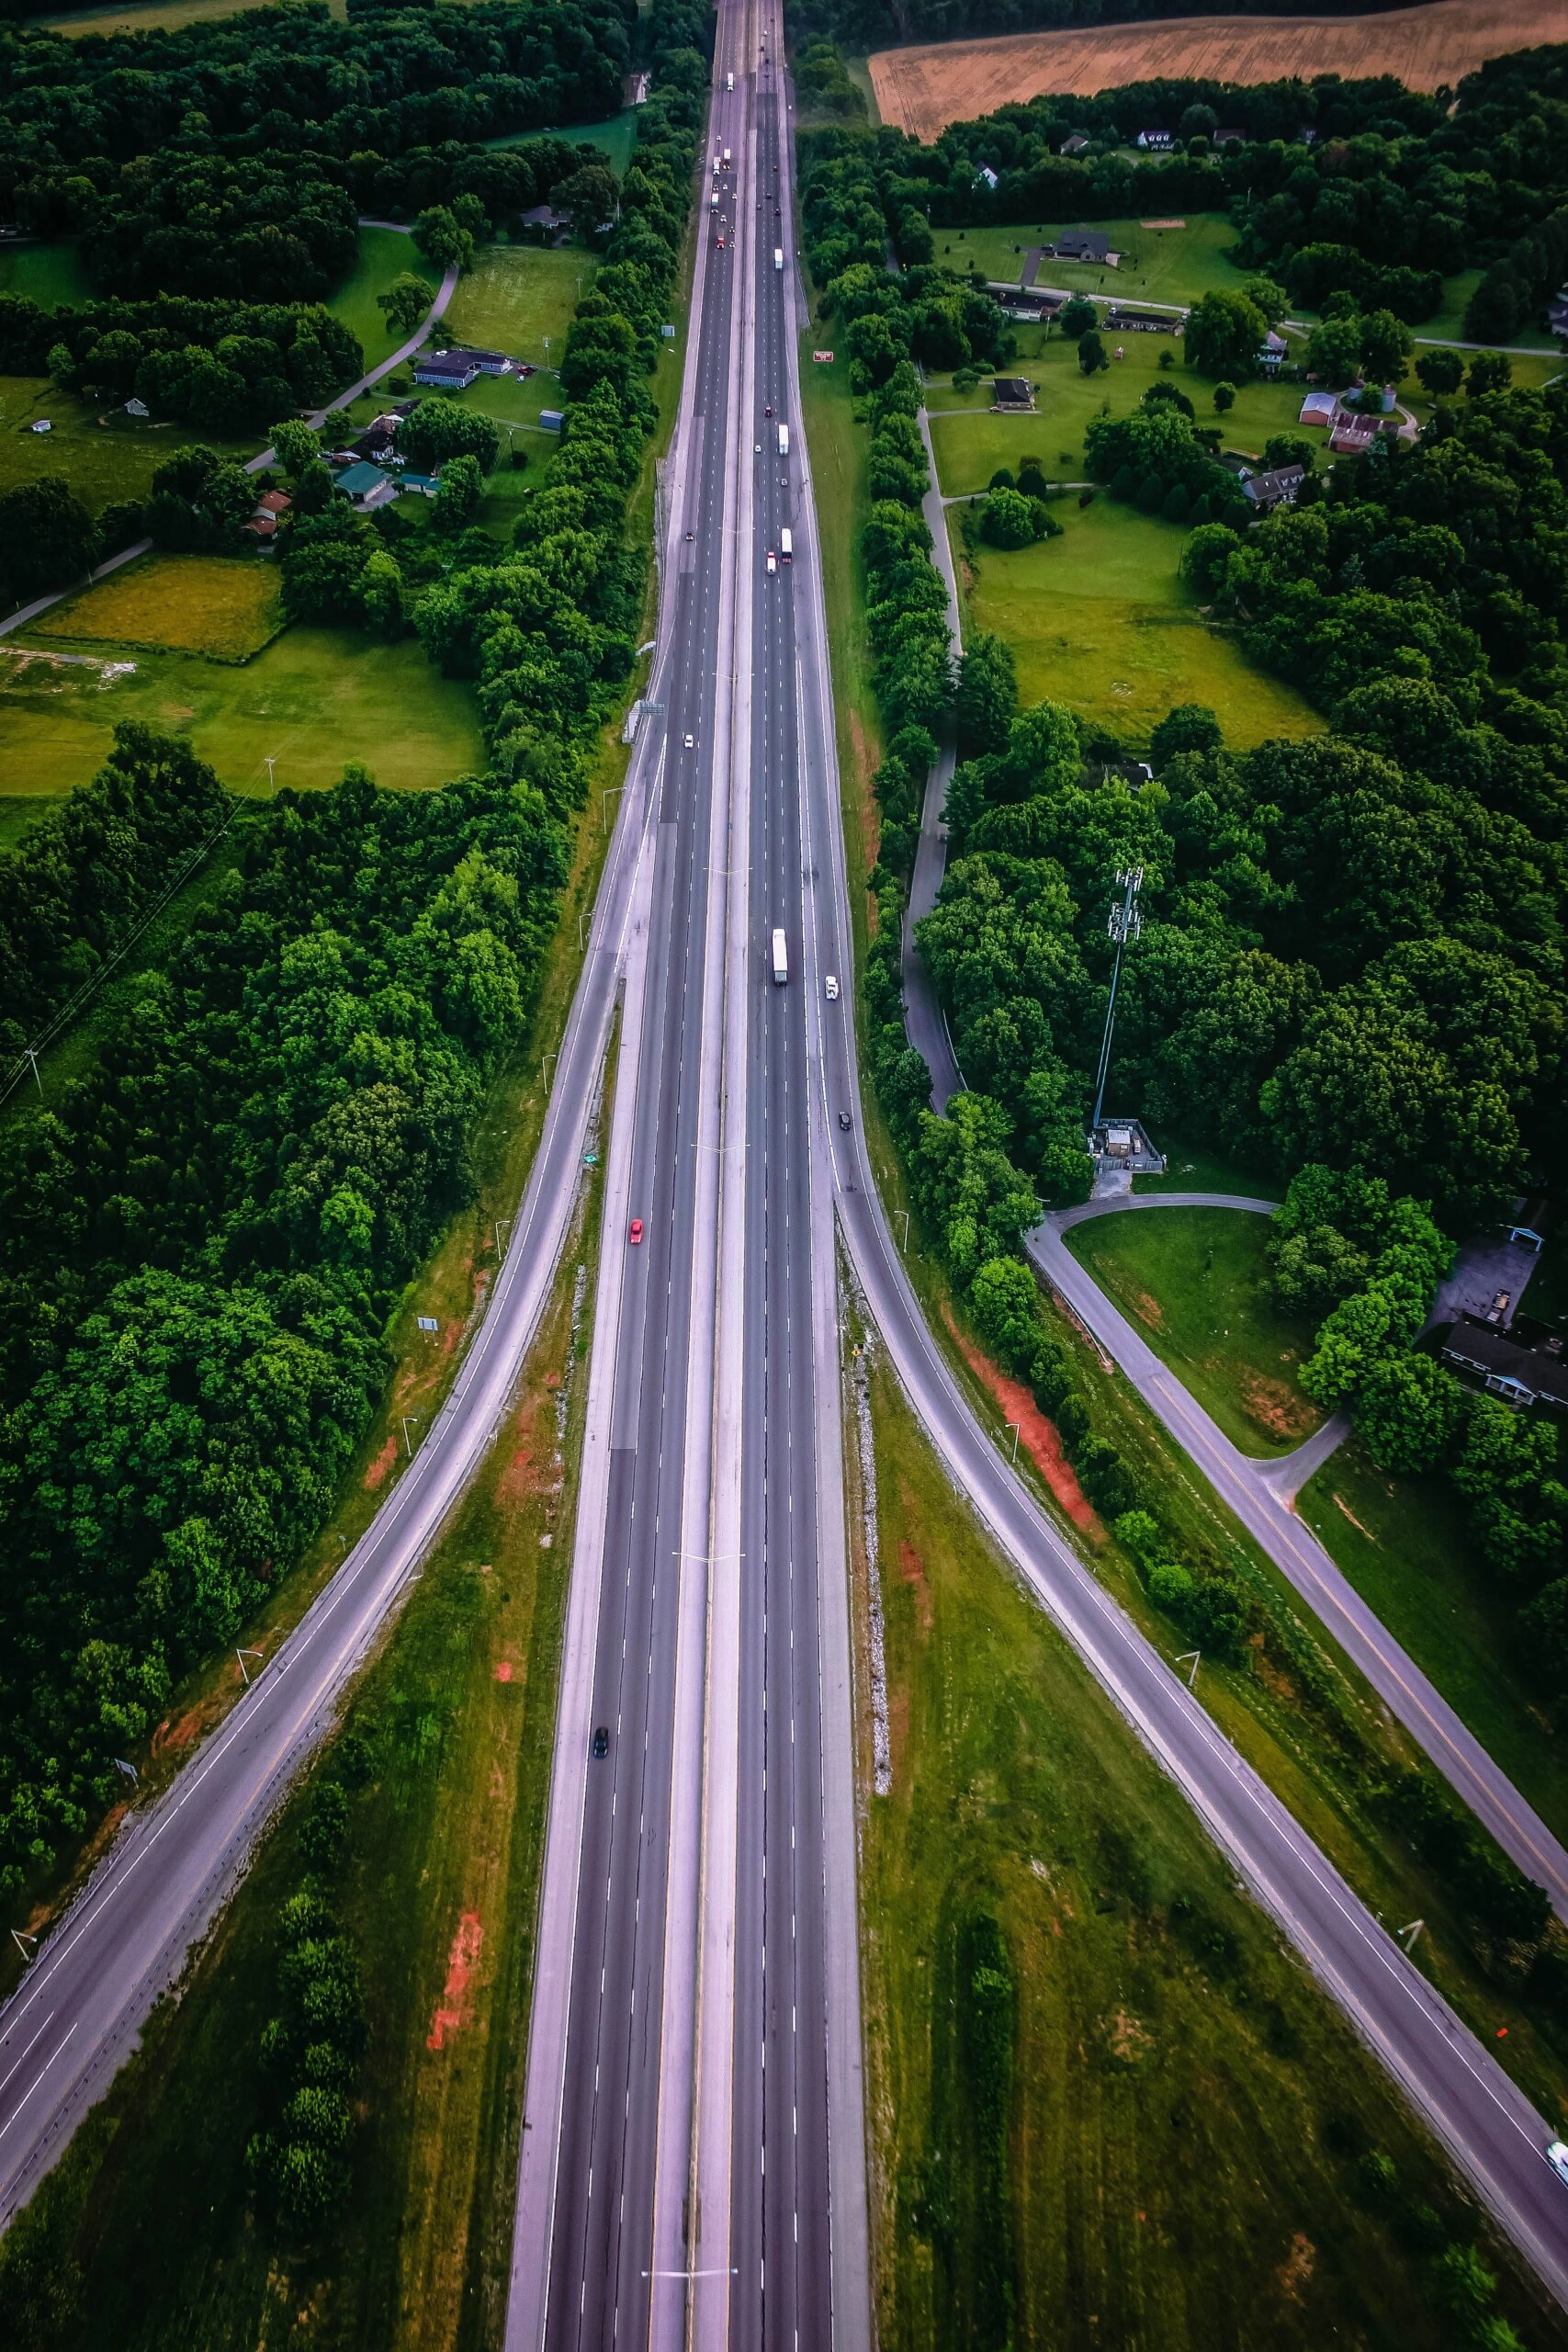 david-barajas-Kentucky, Bowling Green, United States Published on July 21, 2018 EOS REBEL T4i Unsplash License I took this photo early morning while on a hot air balloon in Kentucky.-unsplash (2)